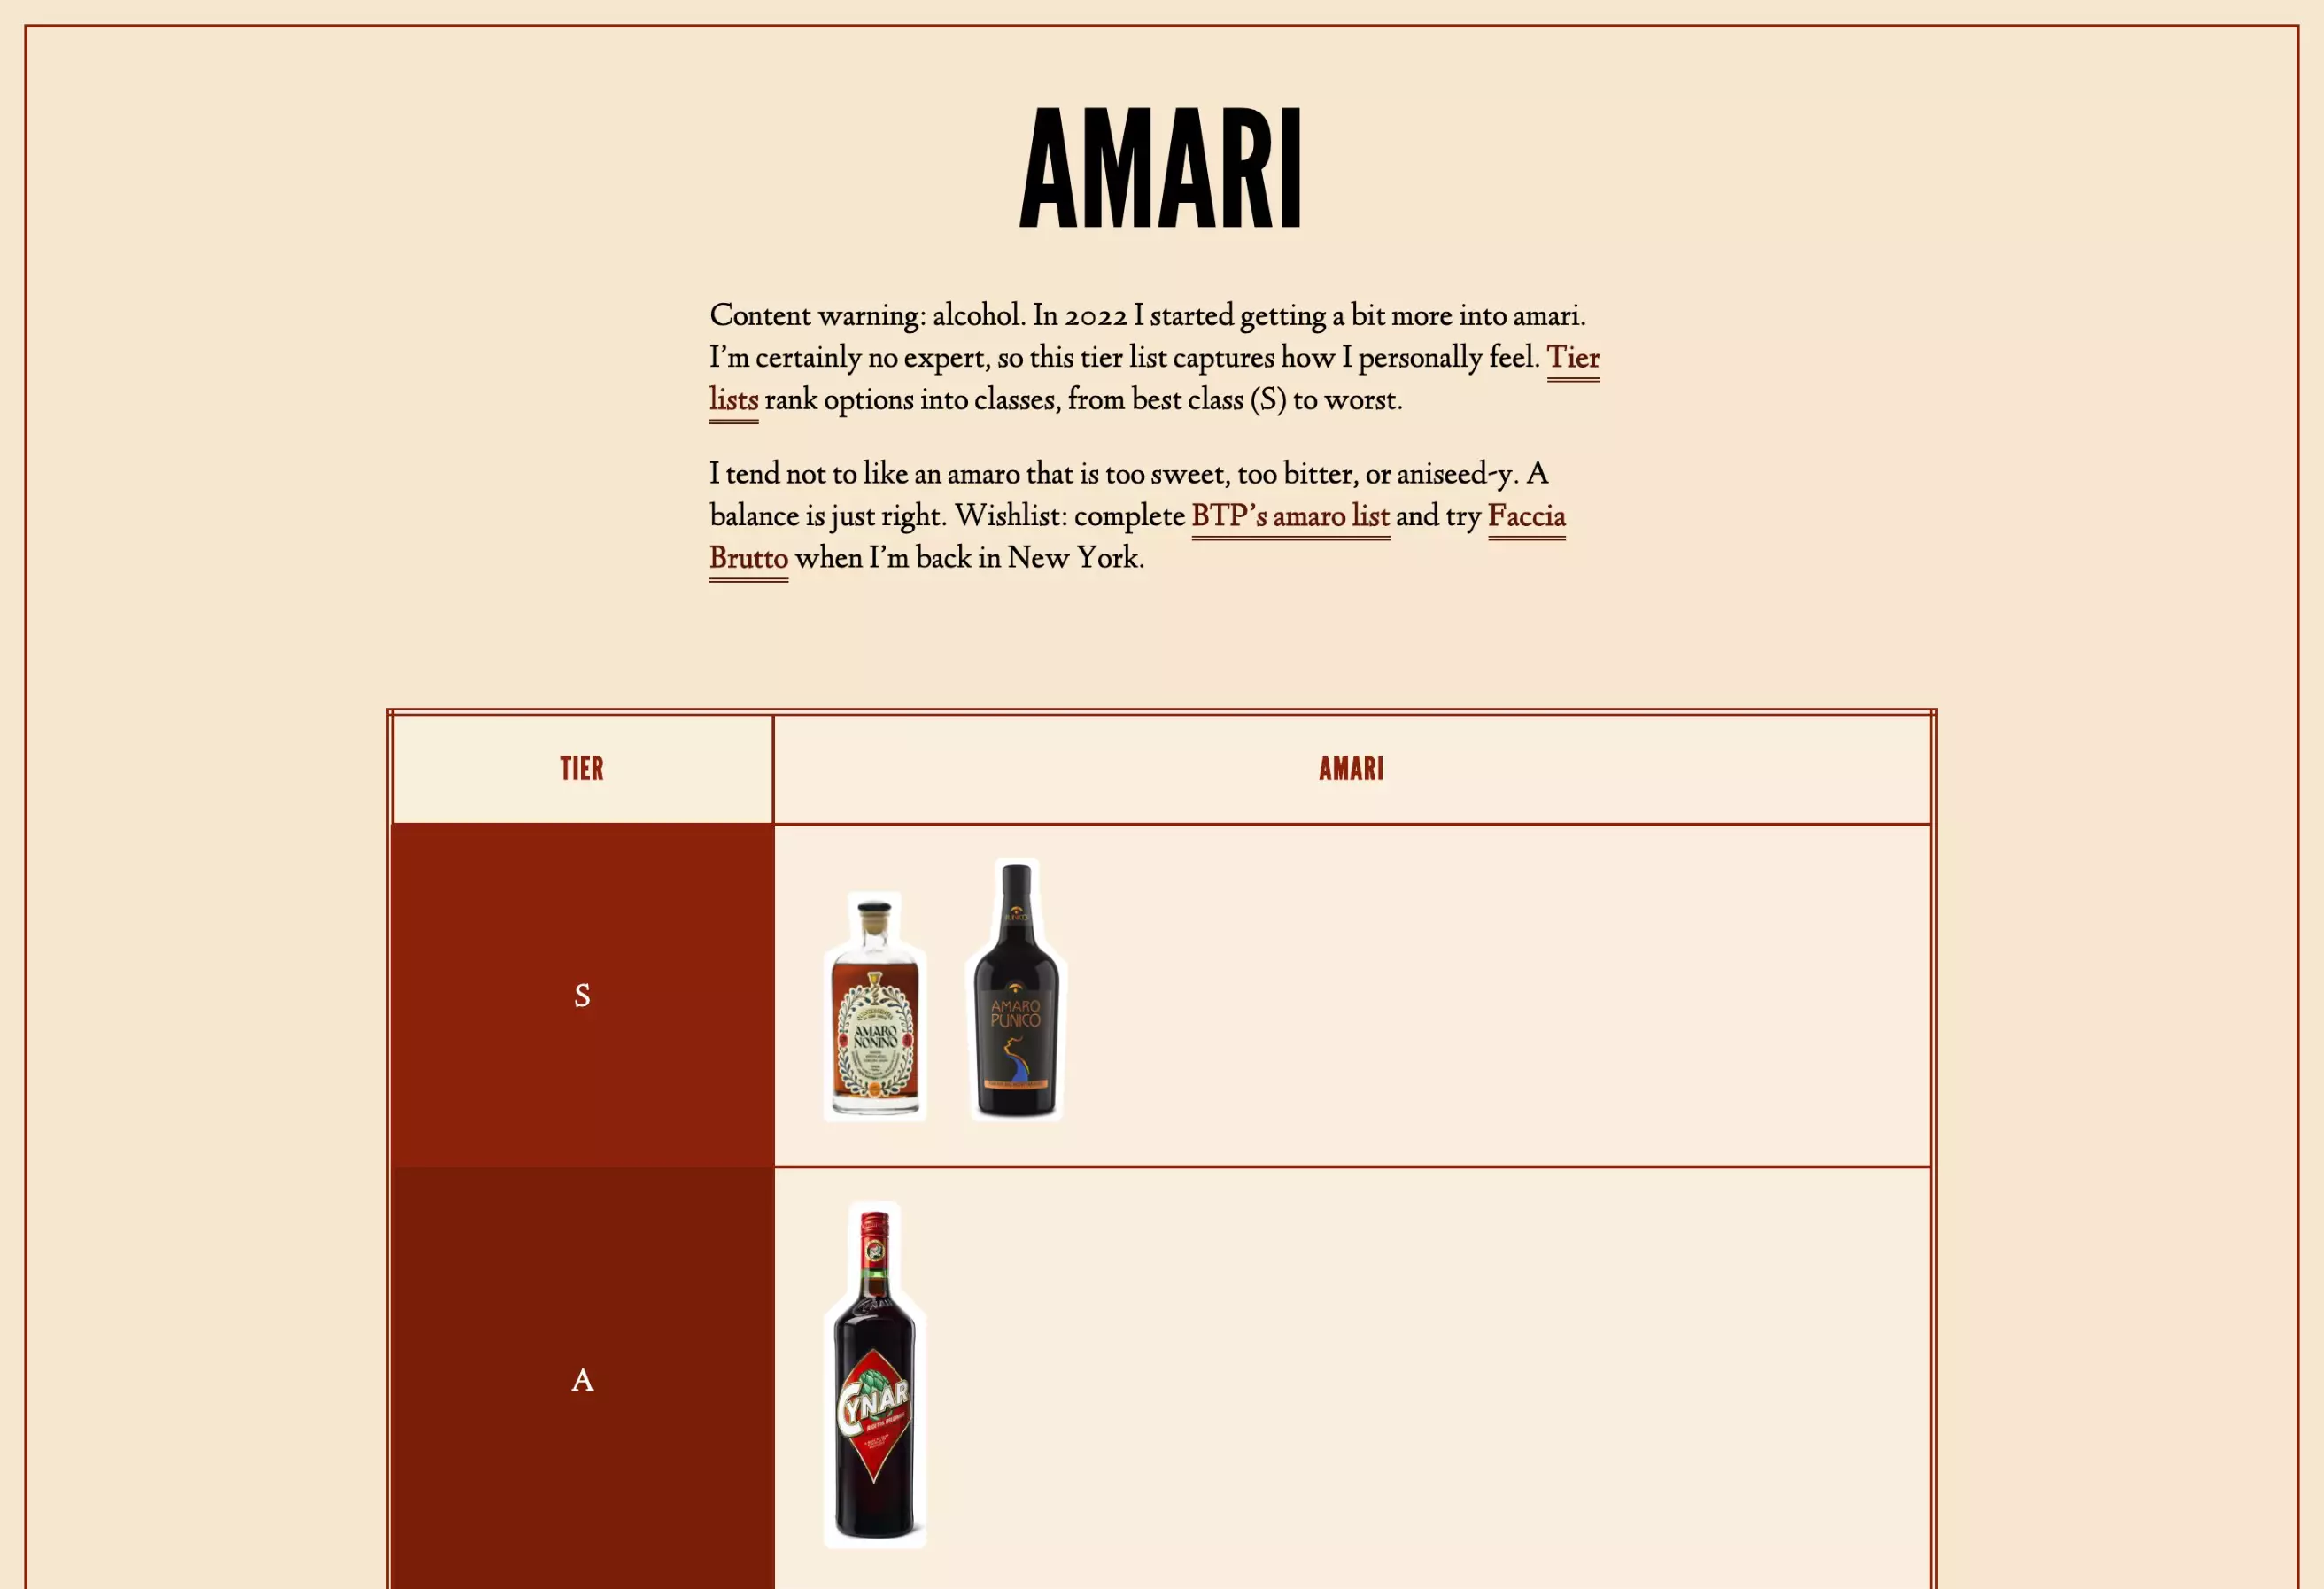 The amari tier list page. Roughly cut-out bottles of Amari are organized by S, A, B, C, D ranks.